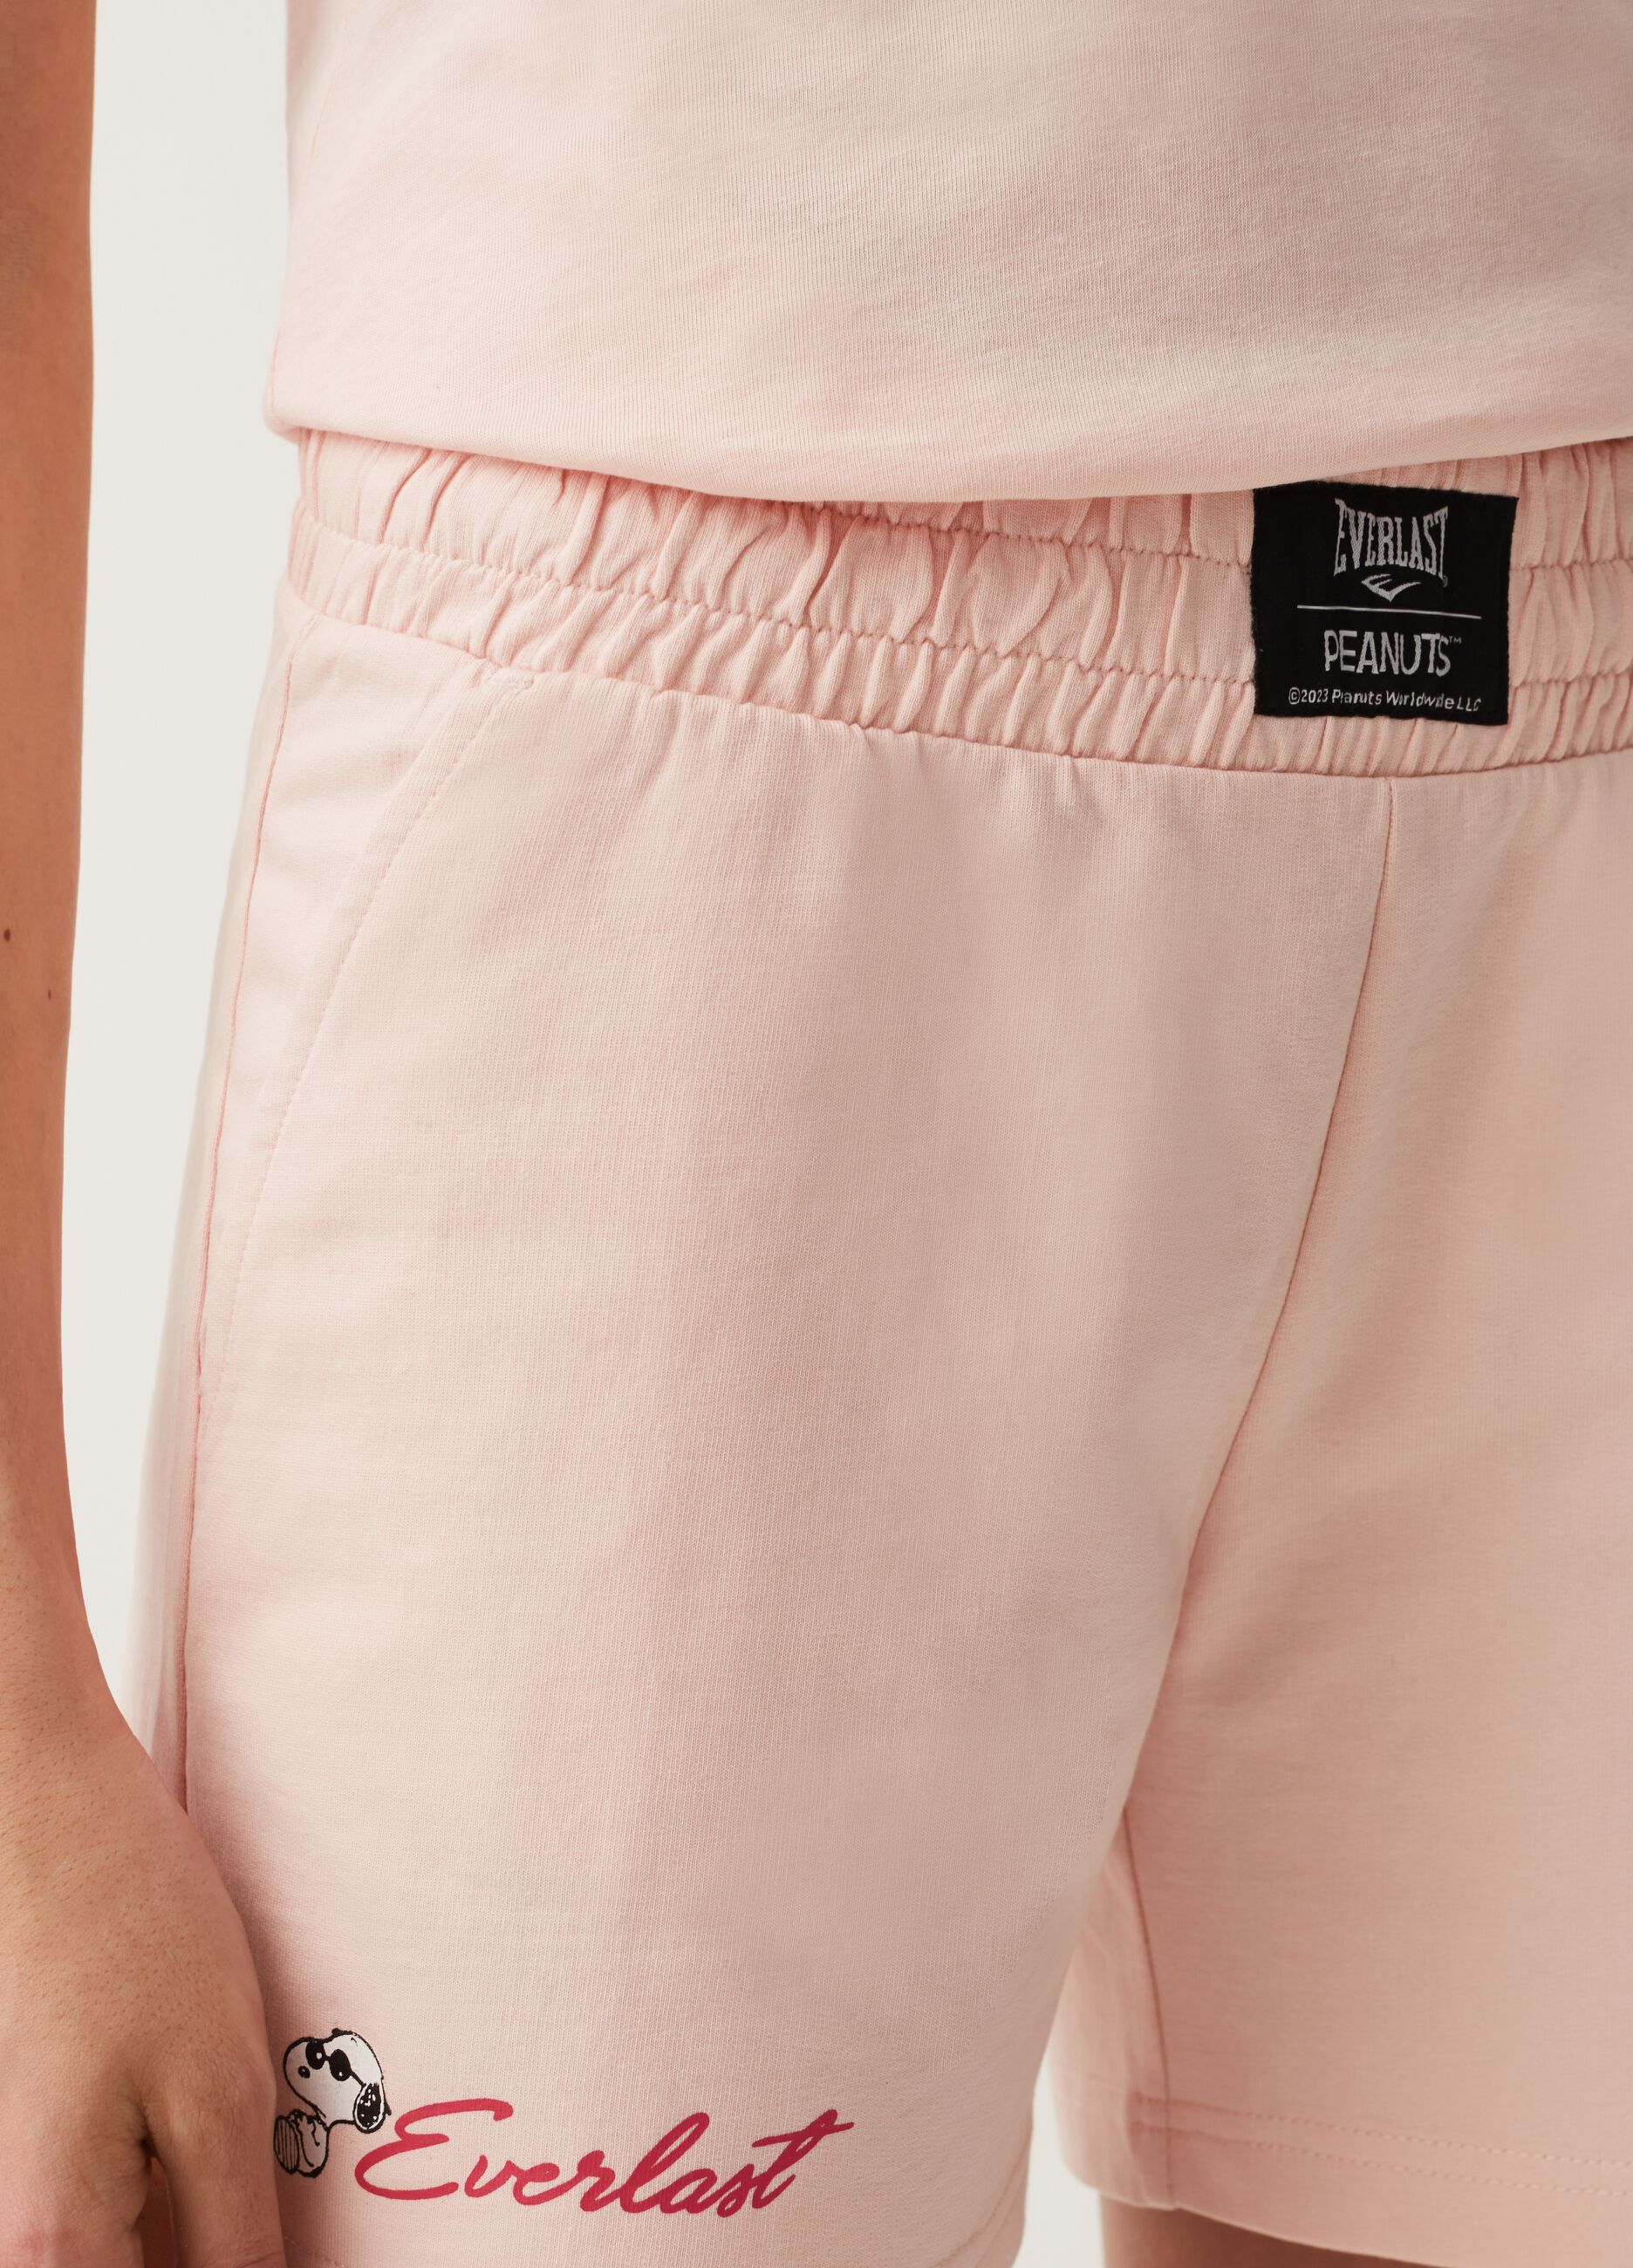 Cotton shorts with Everlast Peanuts print